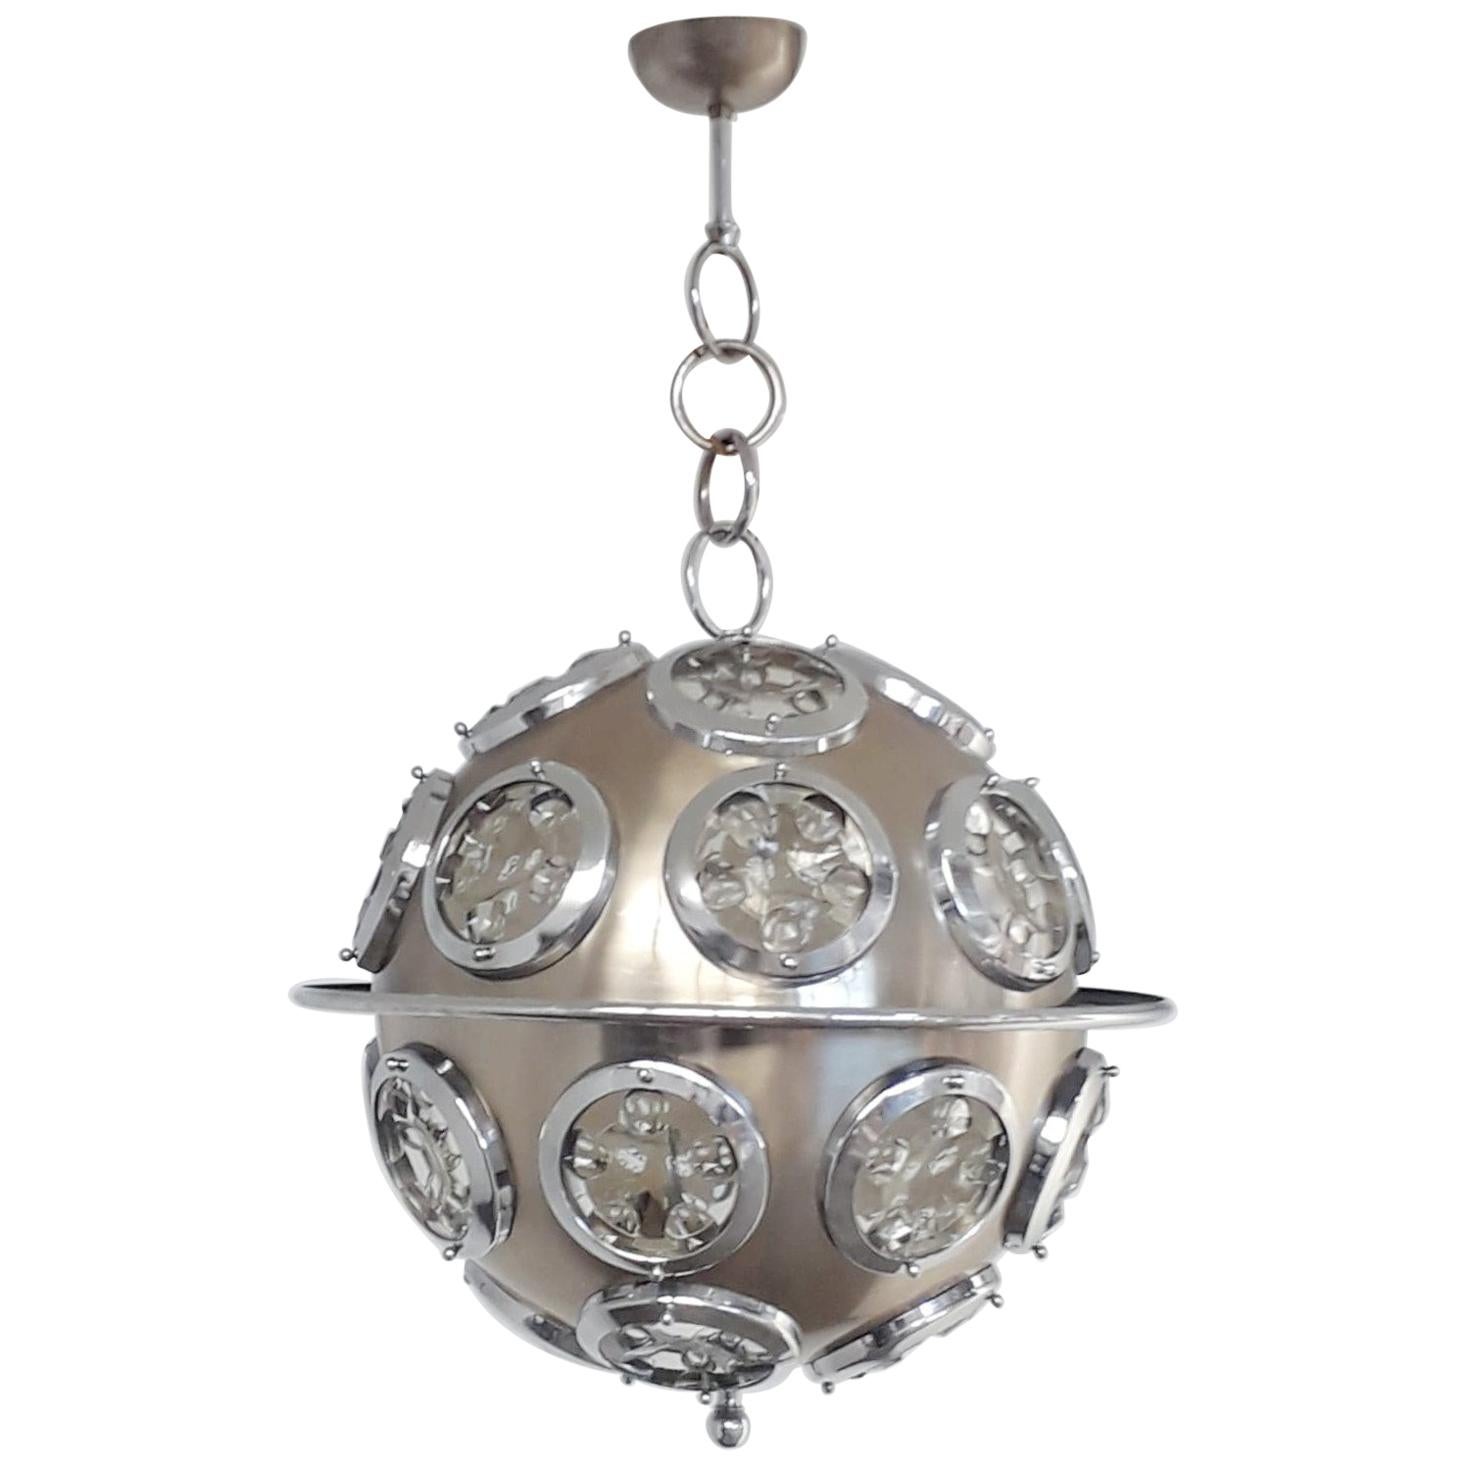 Vintage Italian chandelier with brushed steel circular structure and optical beveled glass lenses / Designed by Oscar Torlasco for Lumi circa 1960s / Made in Italy
6 lights / E12 or E14 type / max 40W each
Diameter: 19.5 inches / Total Height: 31.5